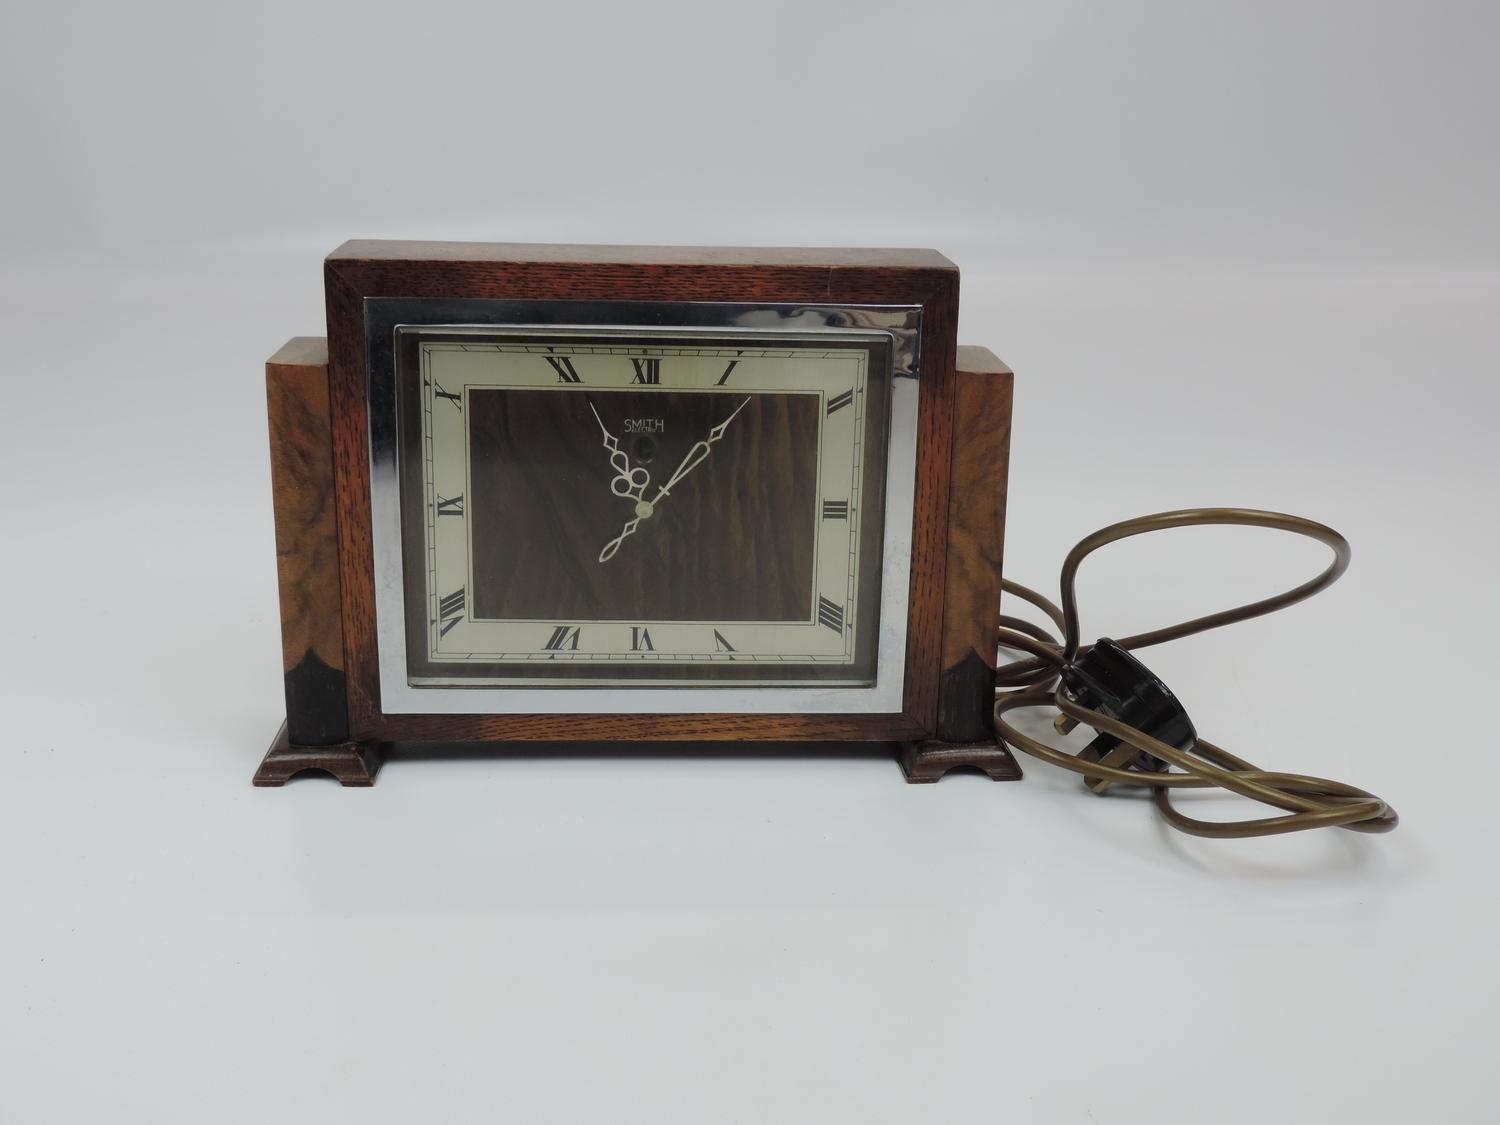 Smith's Electric Clock